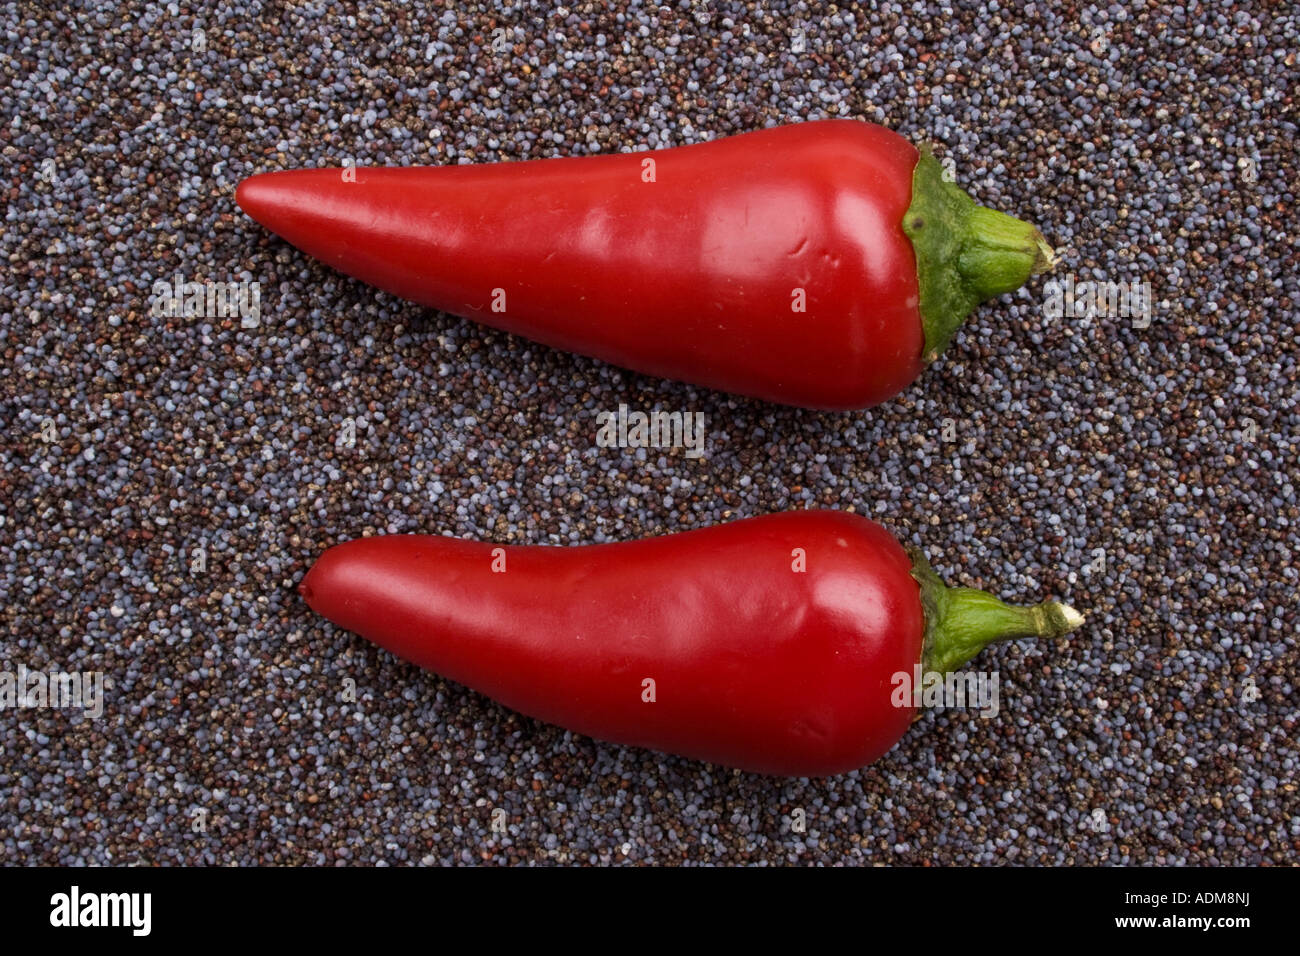 Two red chili peppers on blue poppy seeds Stock Photo